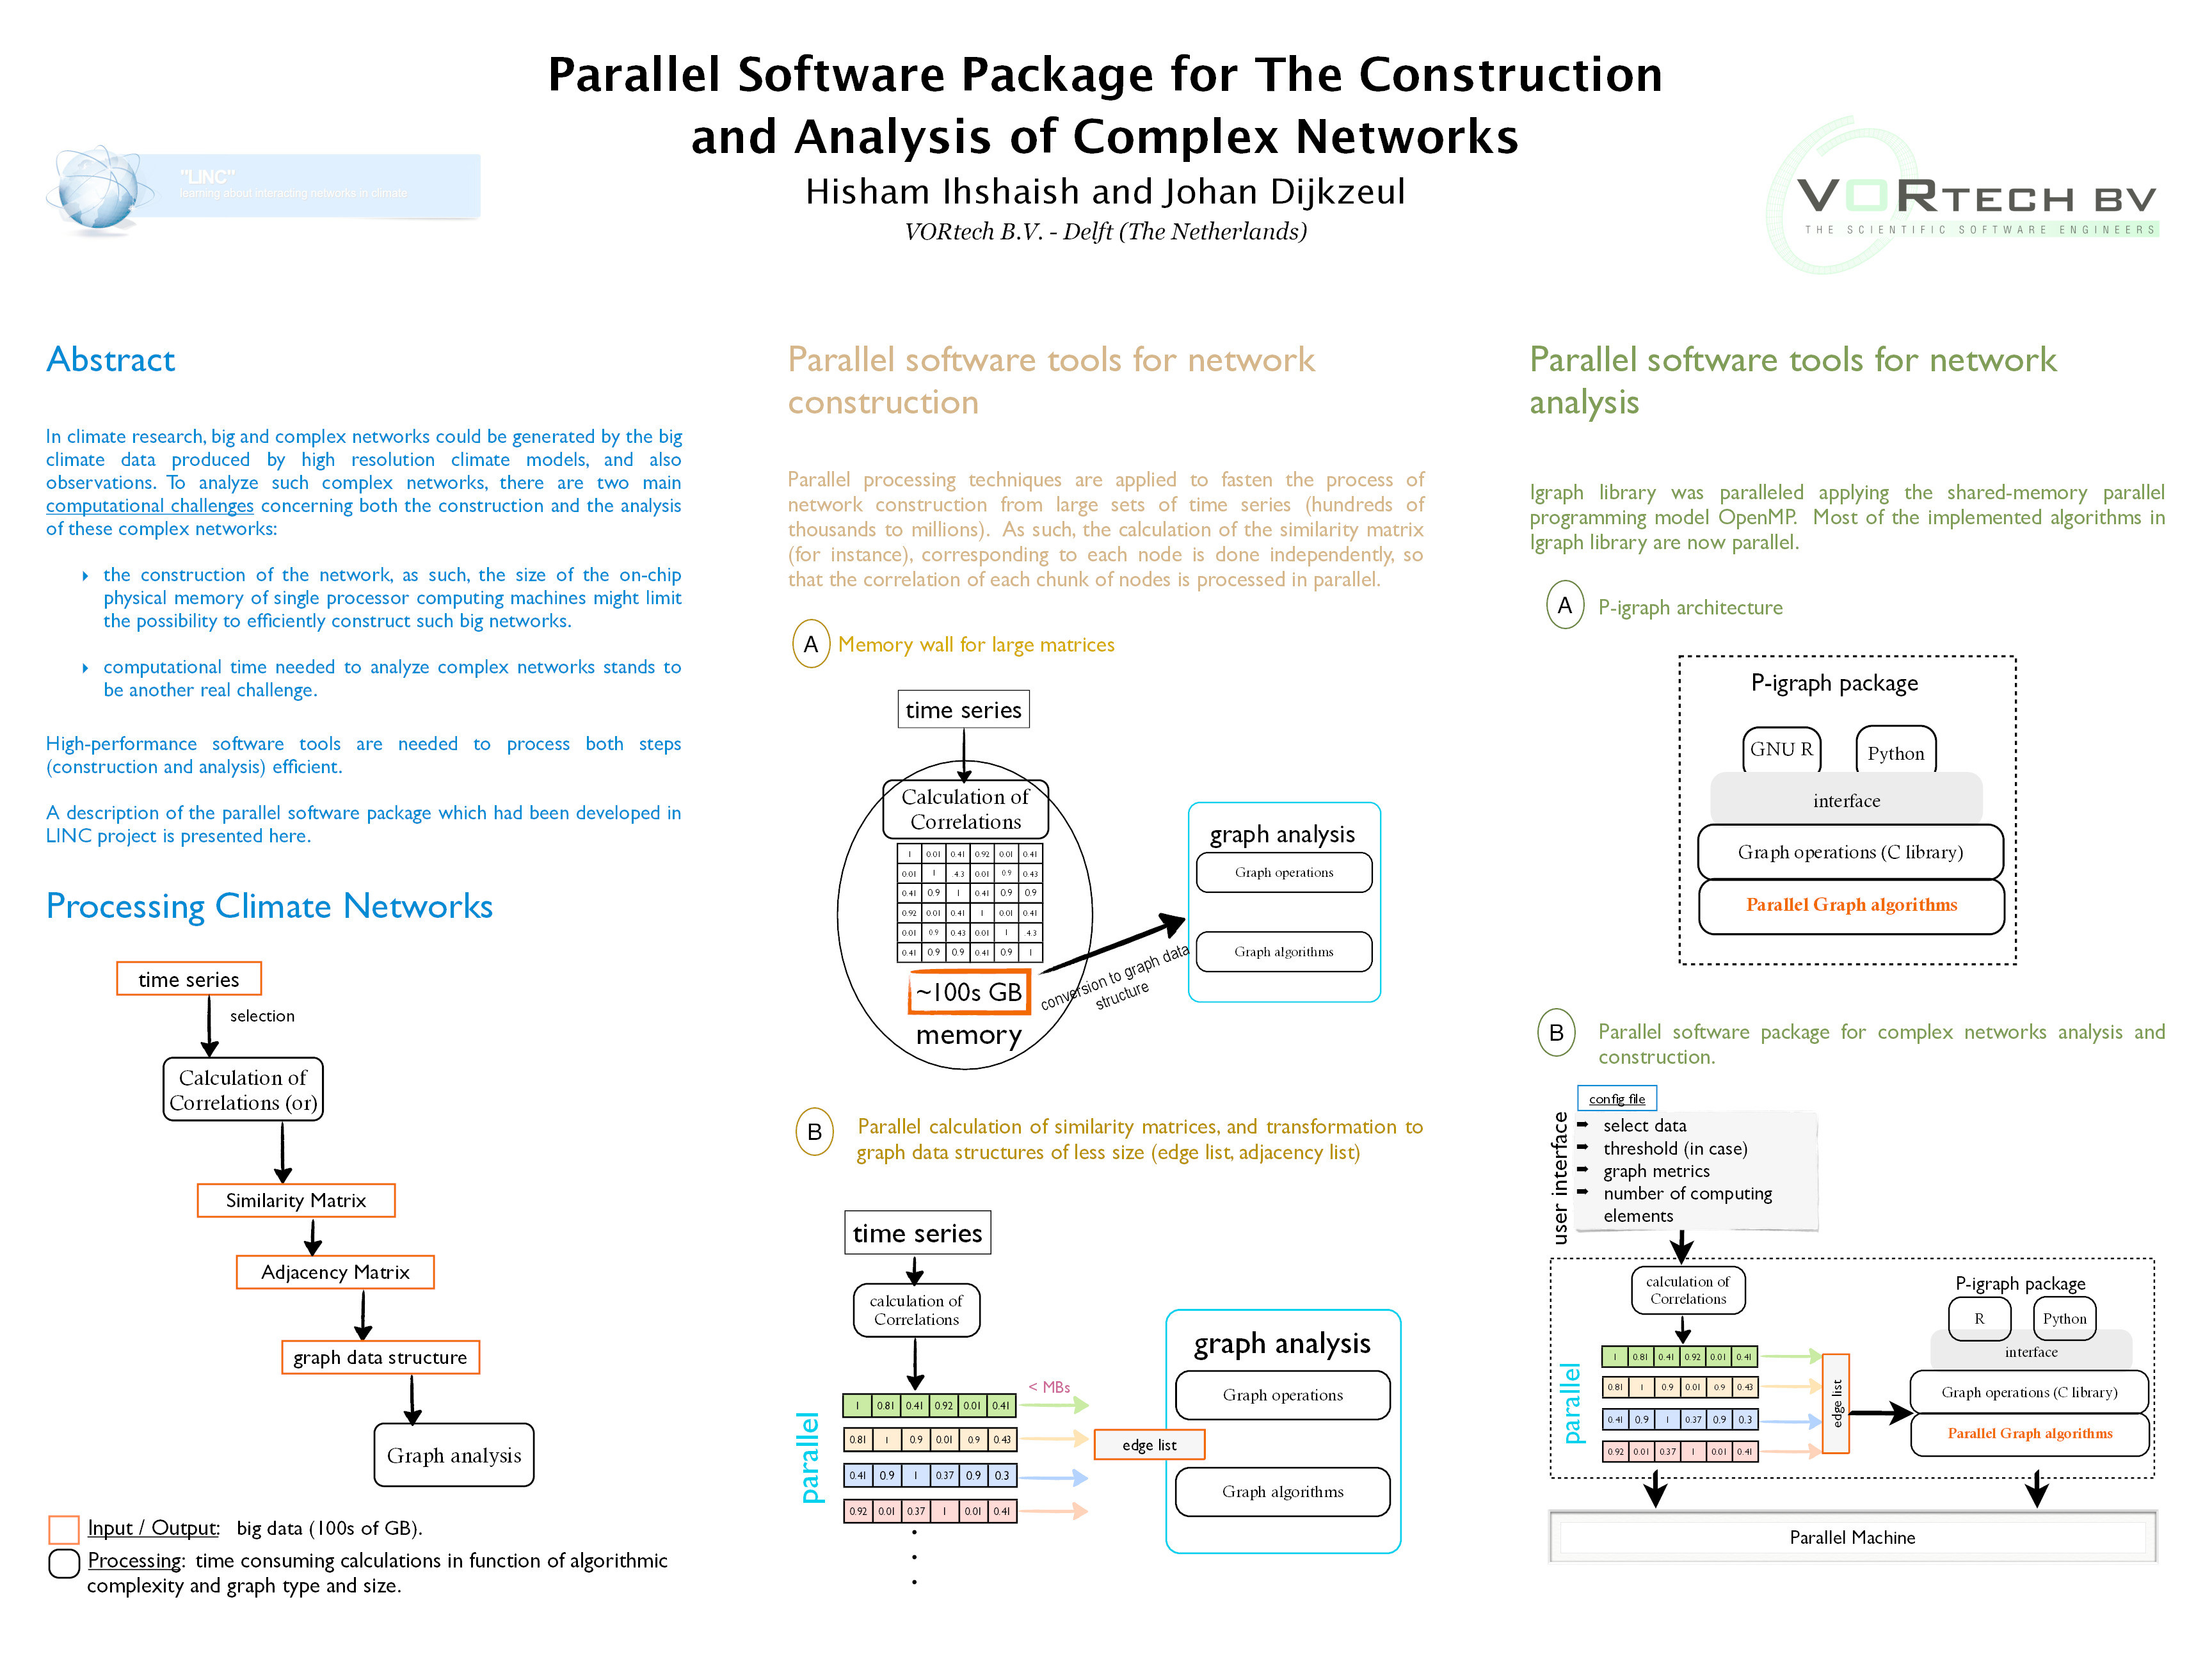 Parallel software package for the construction and analysis of complex networks Thumbnail